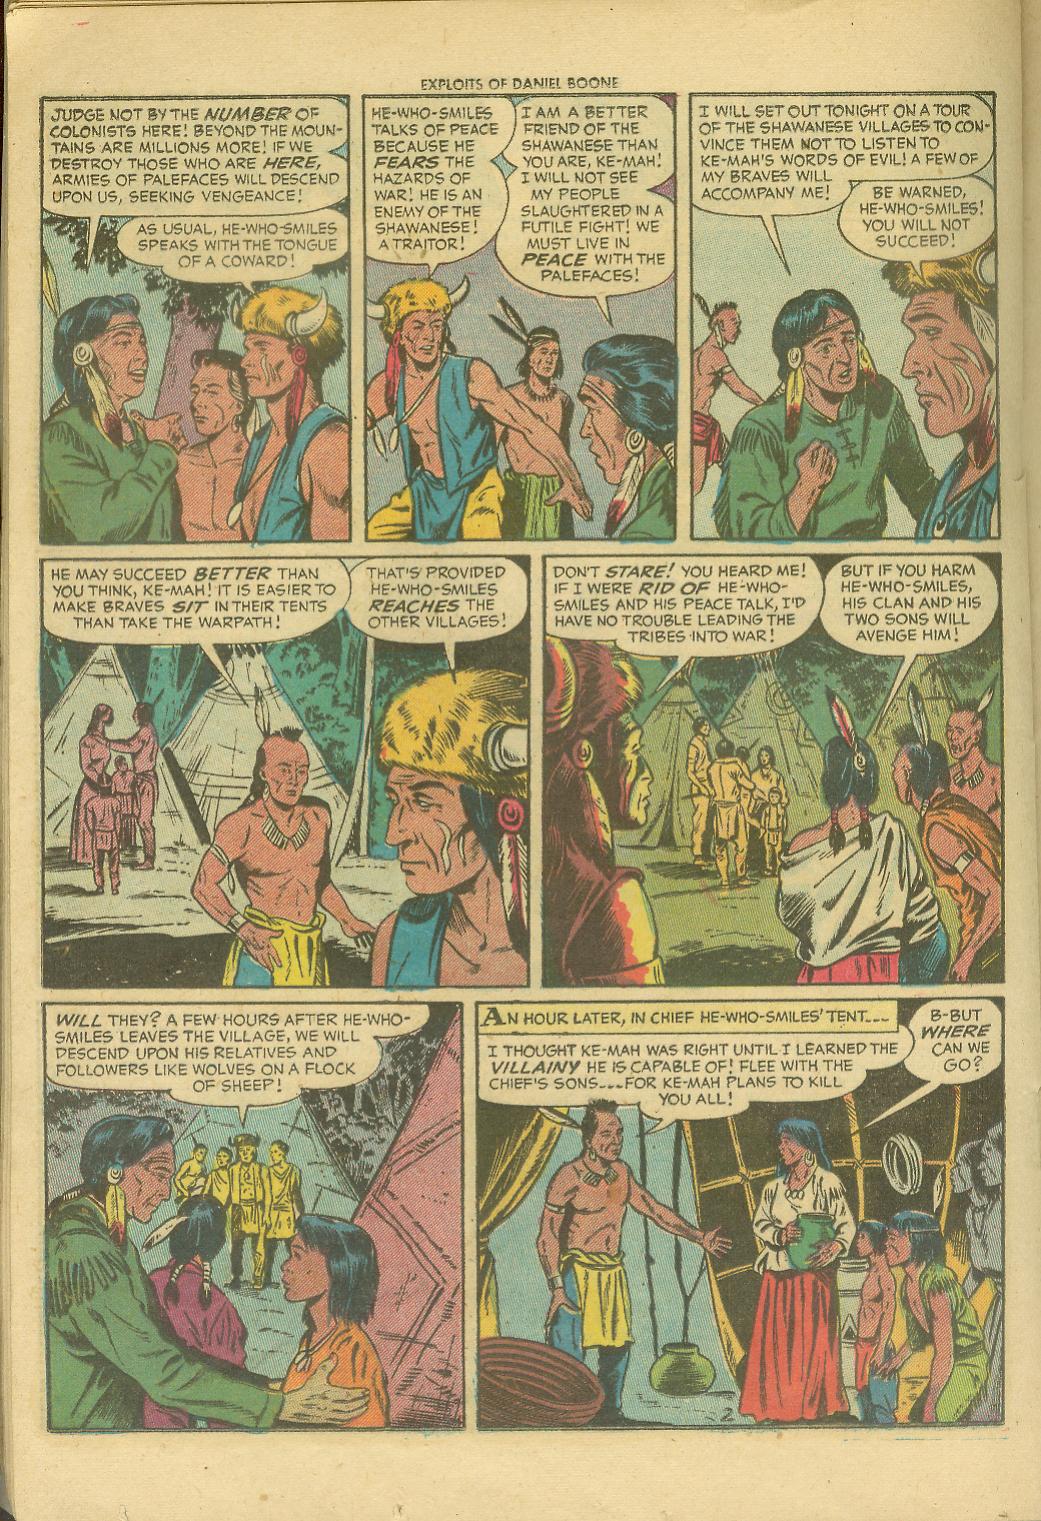 Read online Exploits of Daniel Boone comic -  Issue #6 - 20